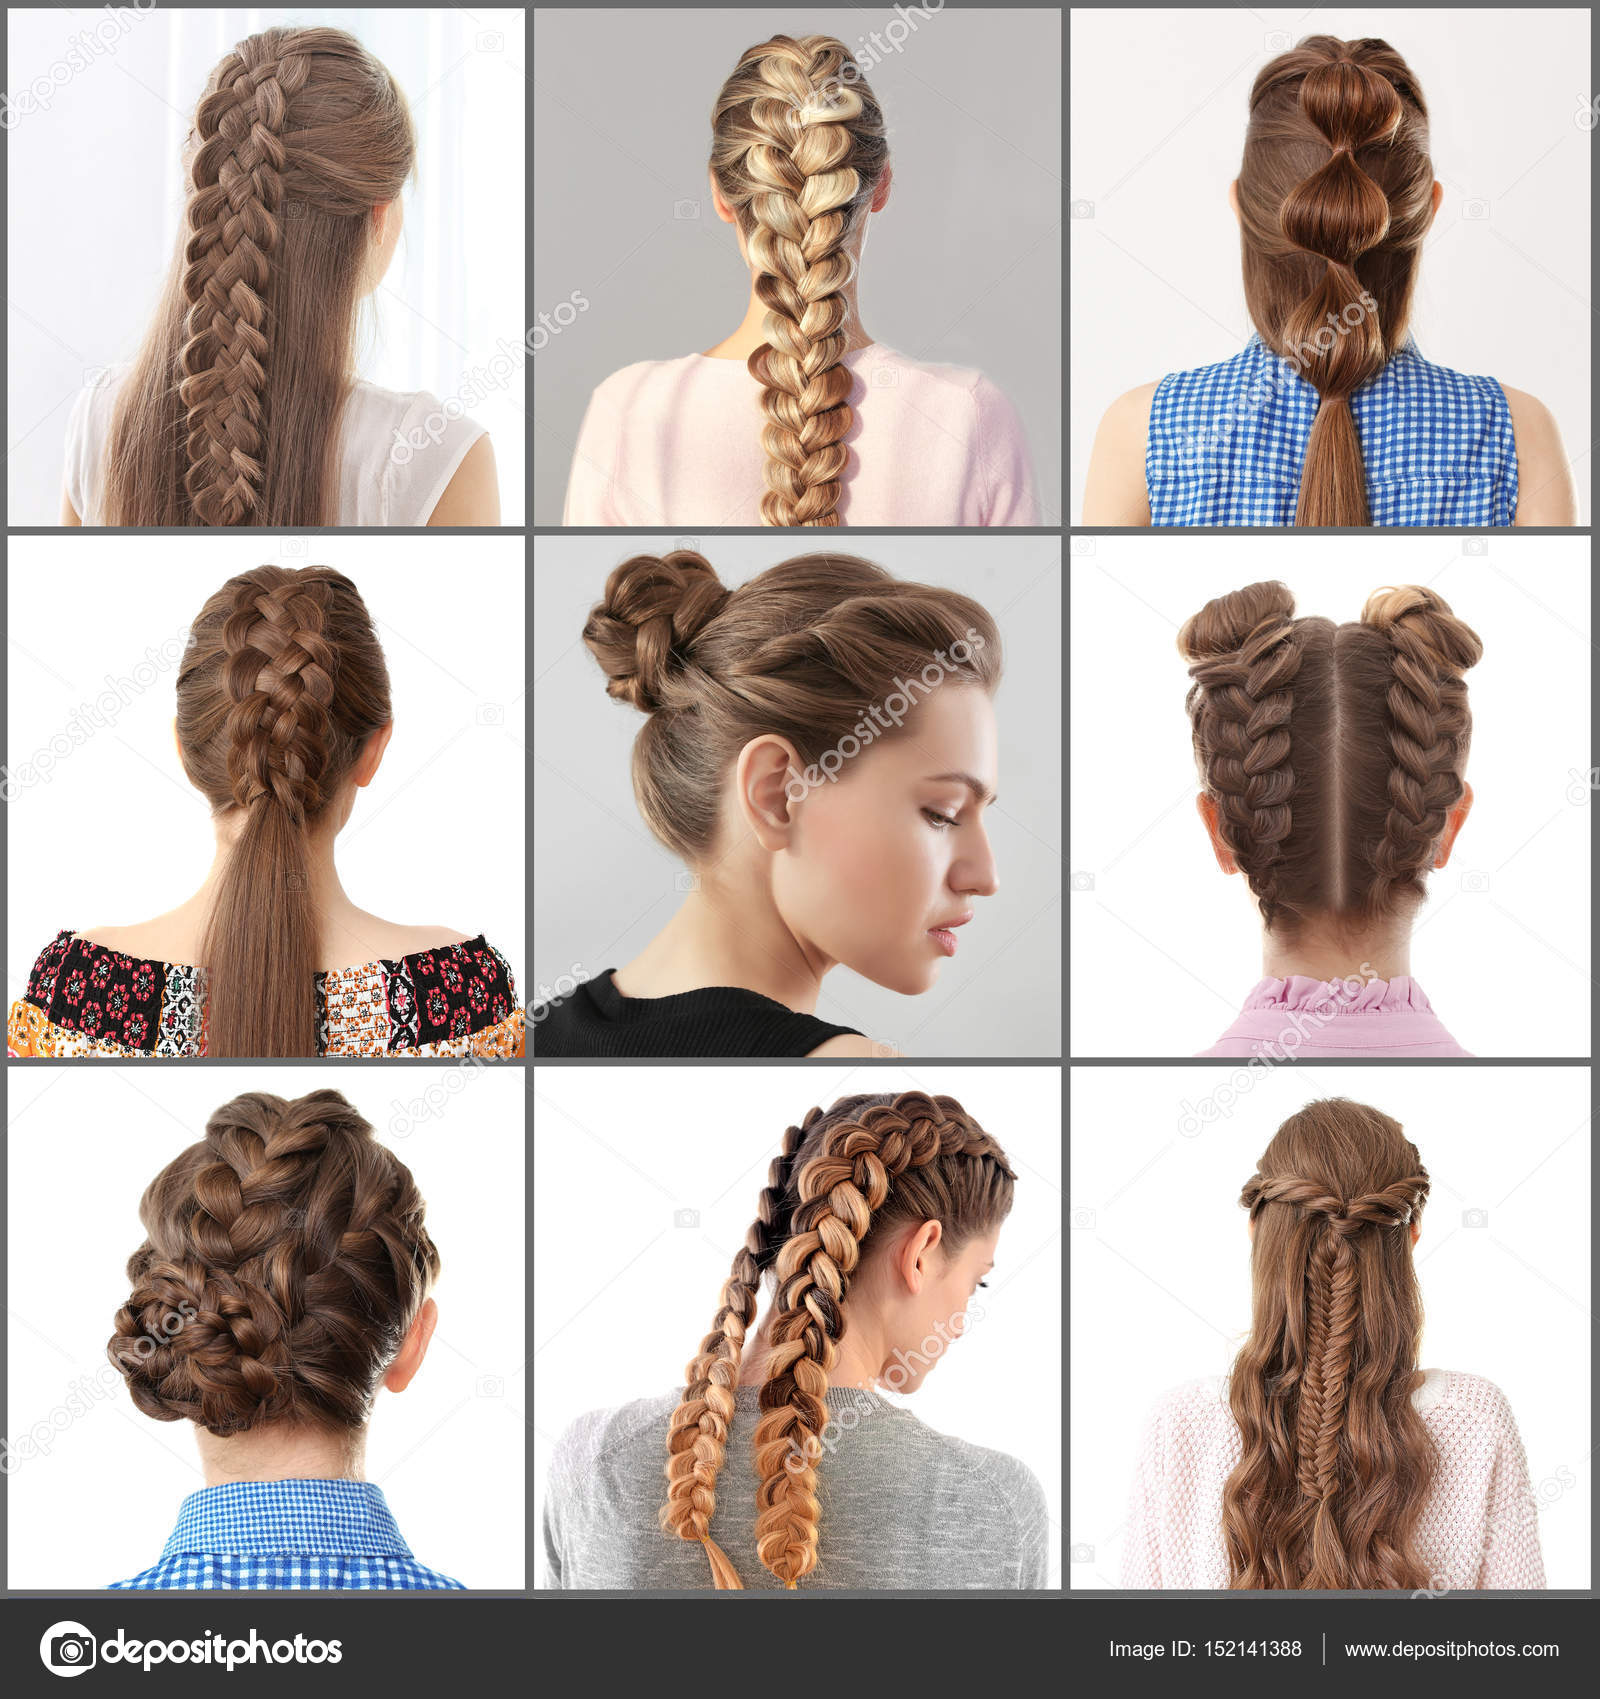 60 Different Types of Haircuts and Hairstyles for Women